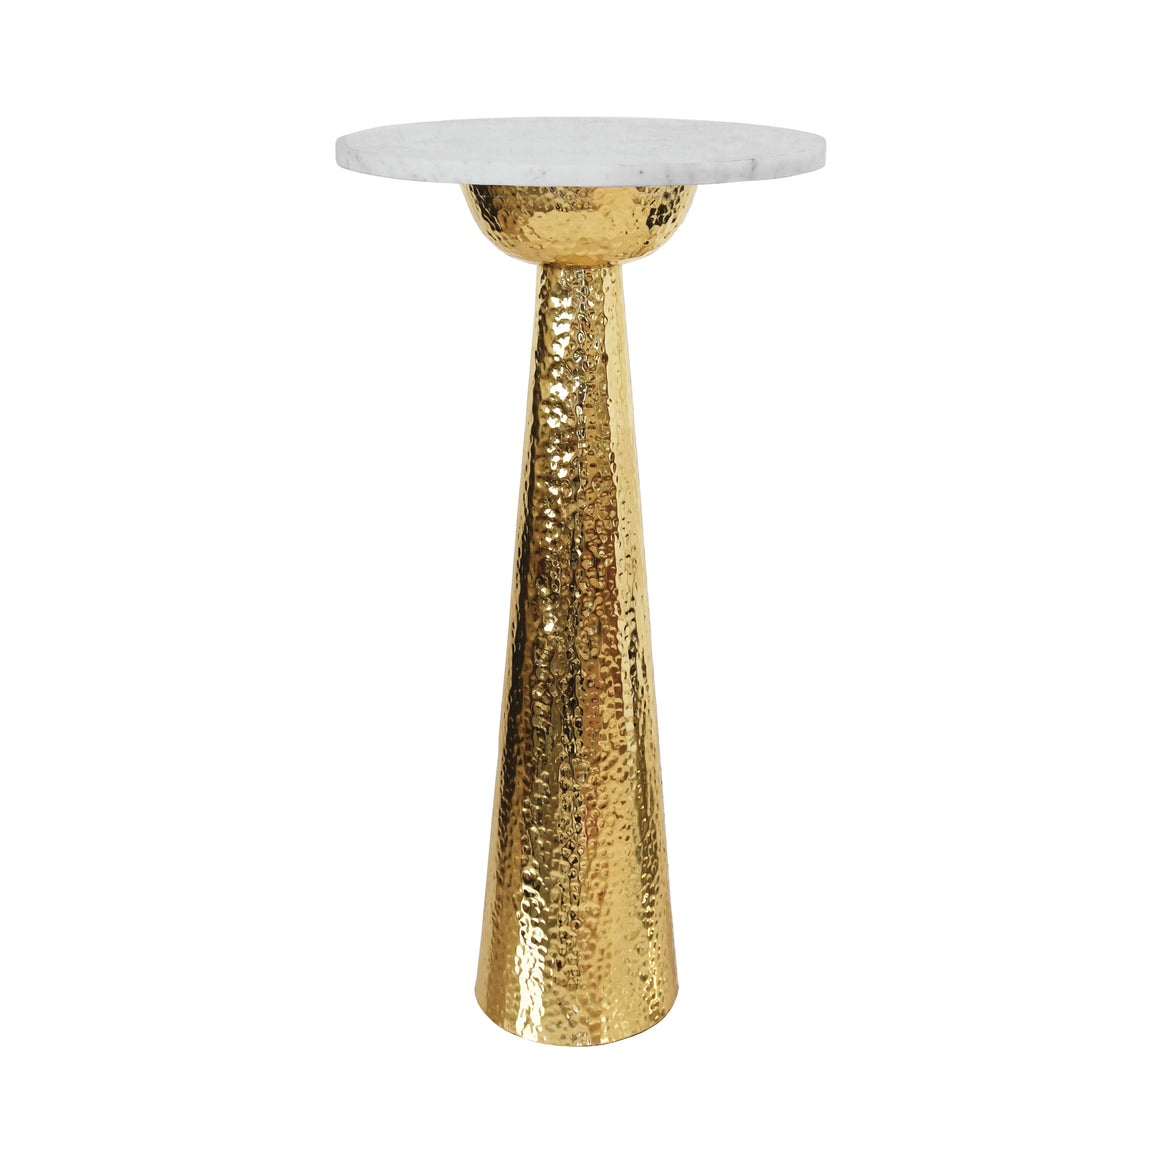 Cynthia Hammered Brass Side Table with White Marble Top